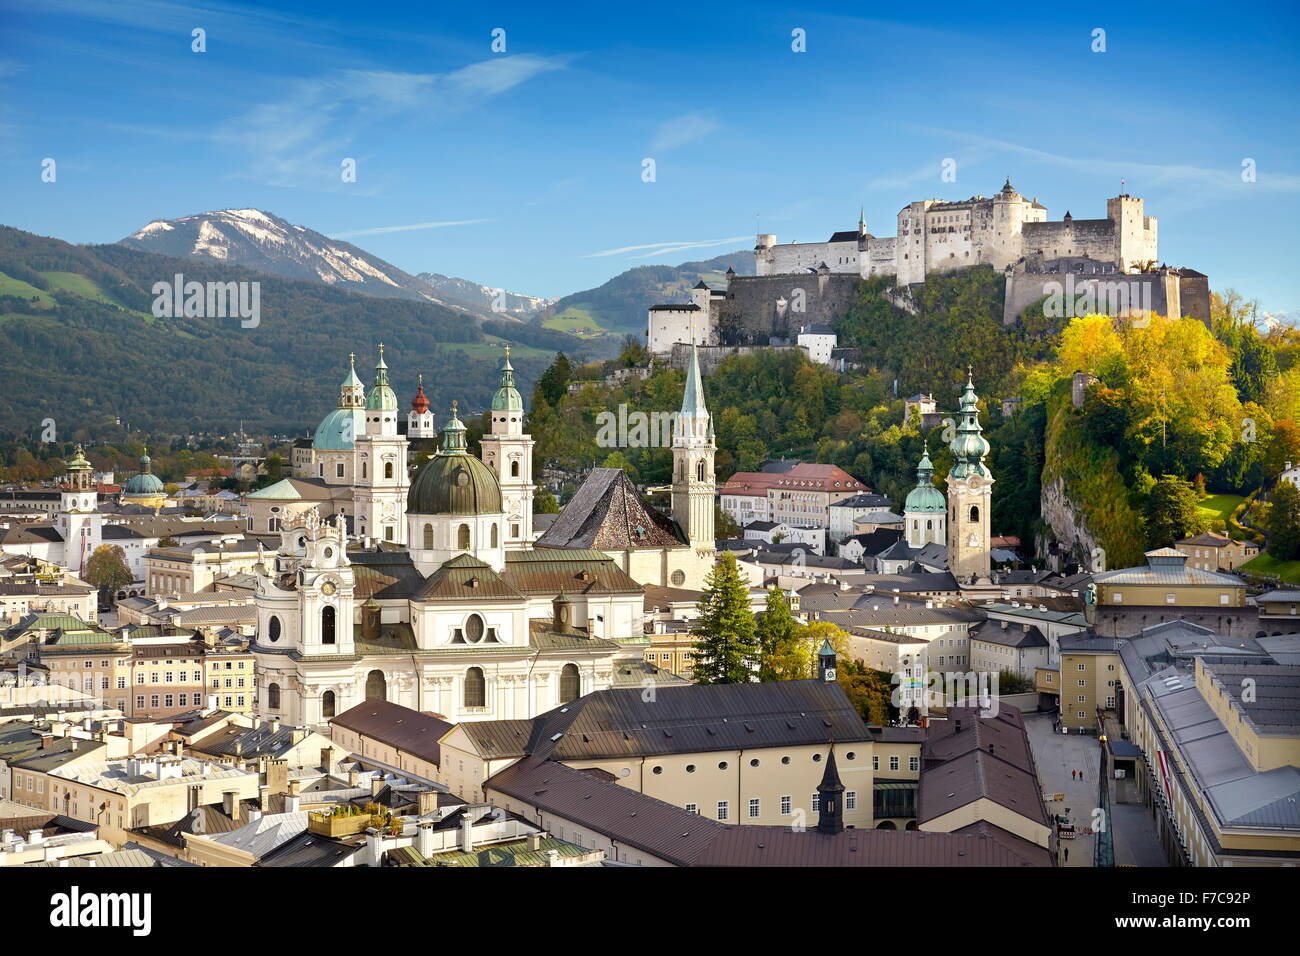 Aerial view of Salzburg Old Town, the Castle visible in the background, Austria Stock Photo